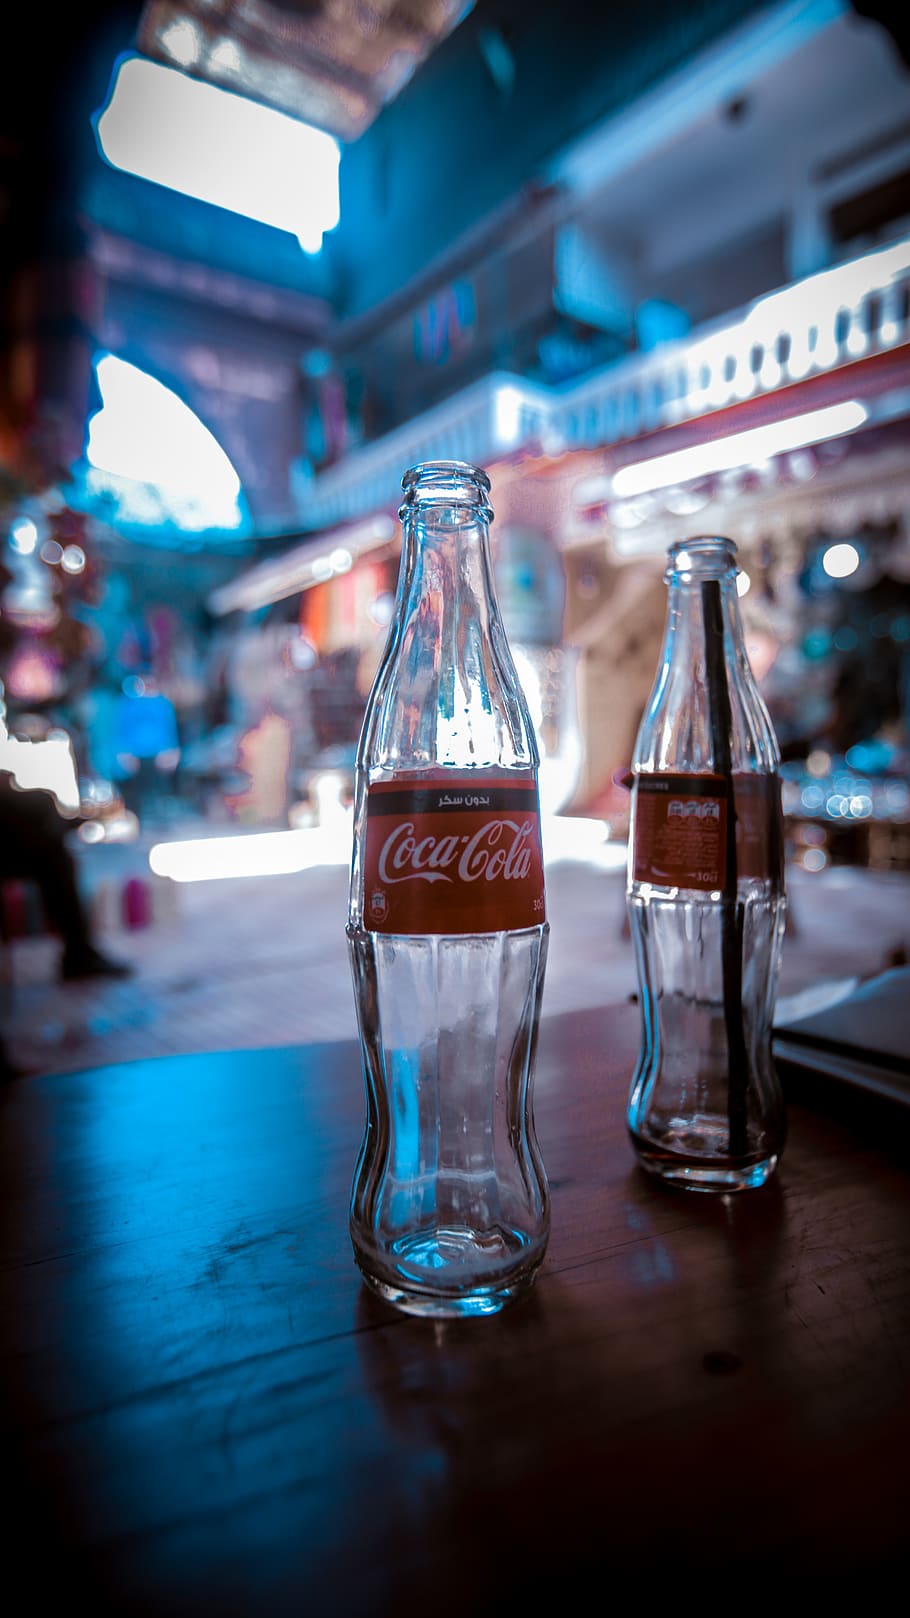 Cocacola 1080P, 2K, 4K, 5K HD wallpapers free download | Wallpaper Flare